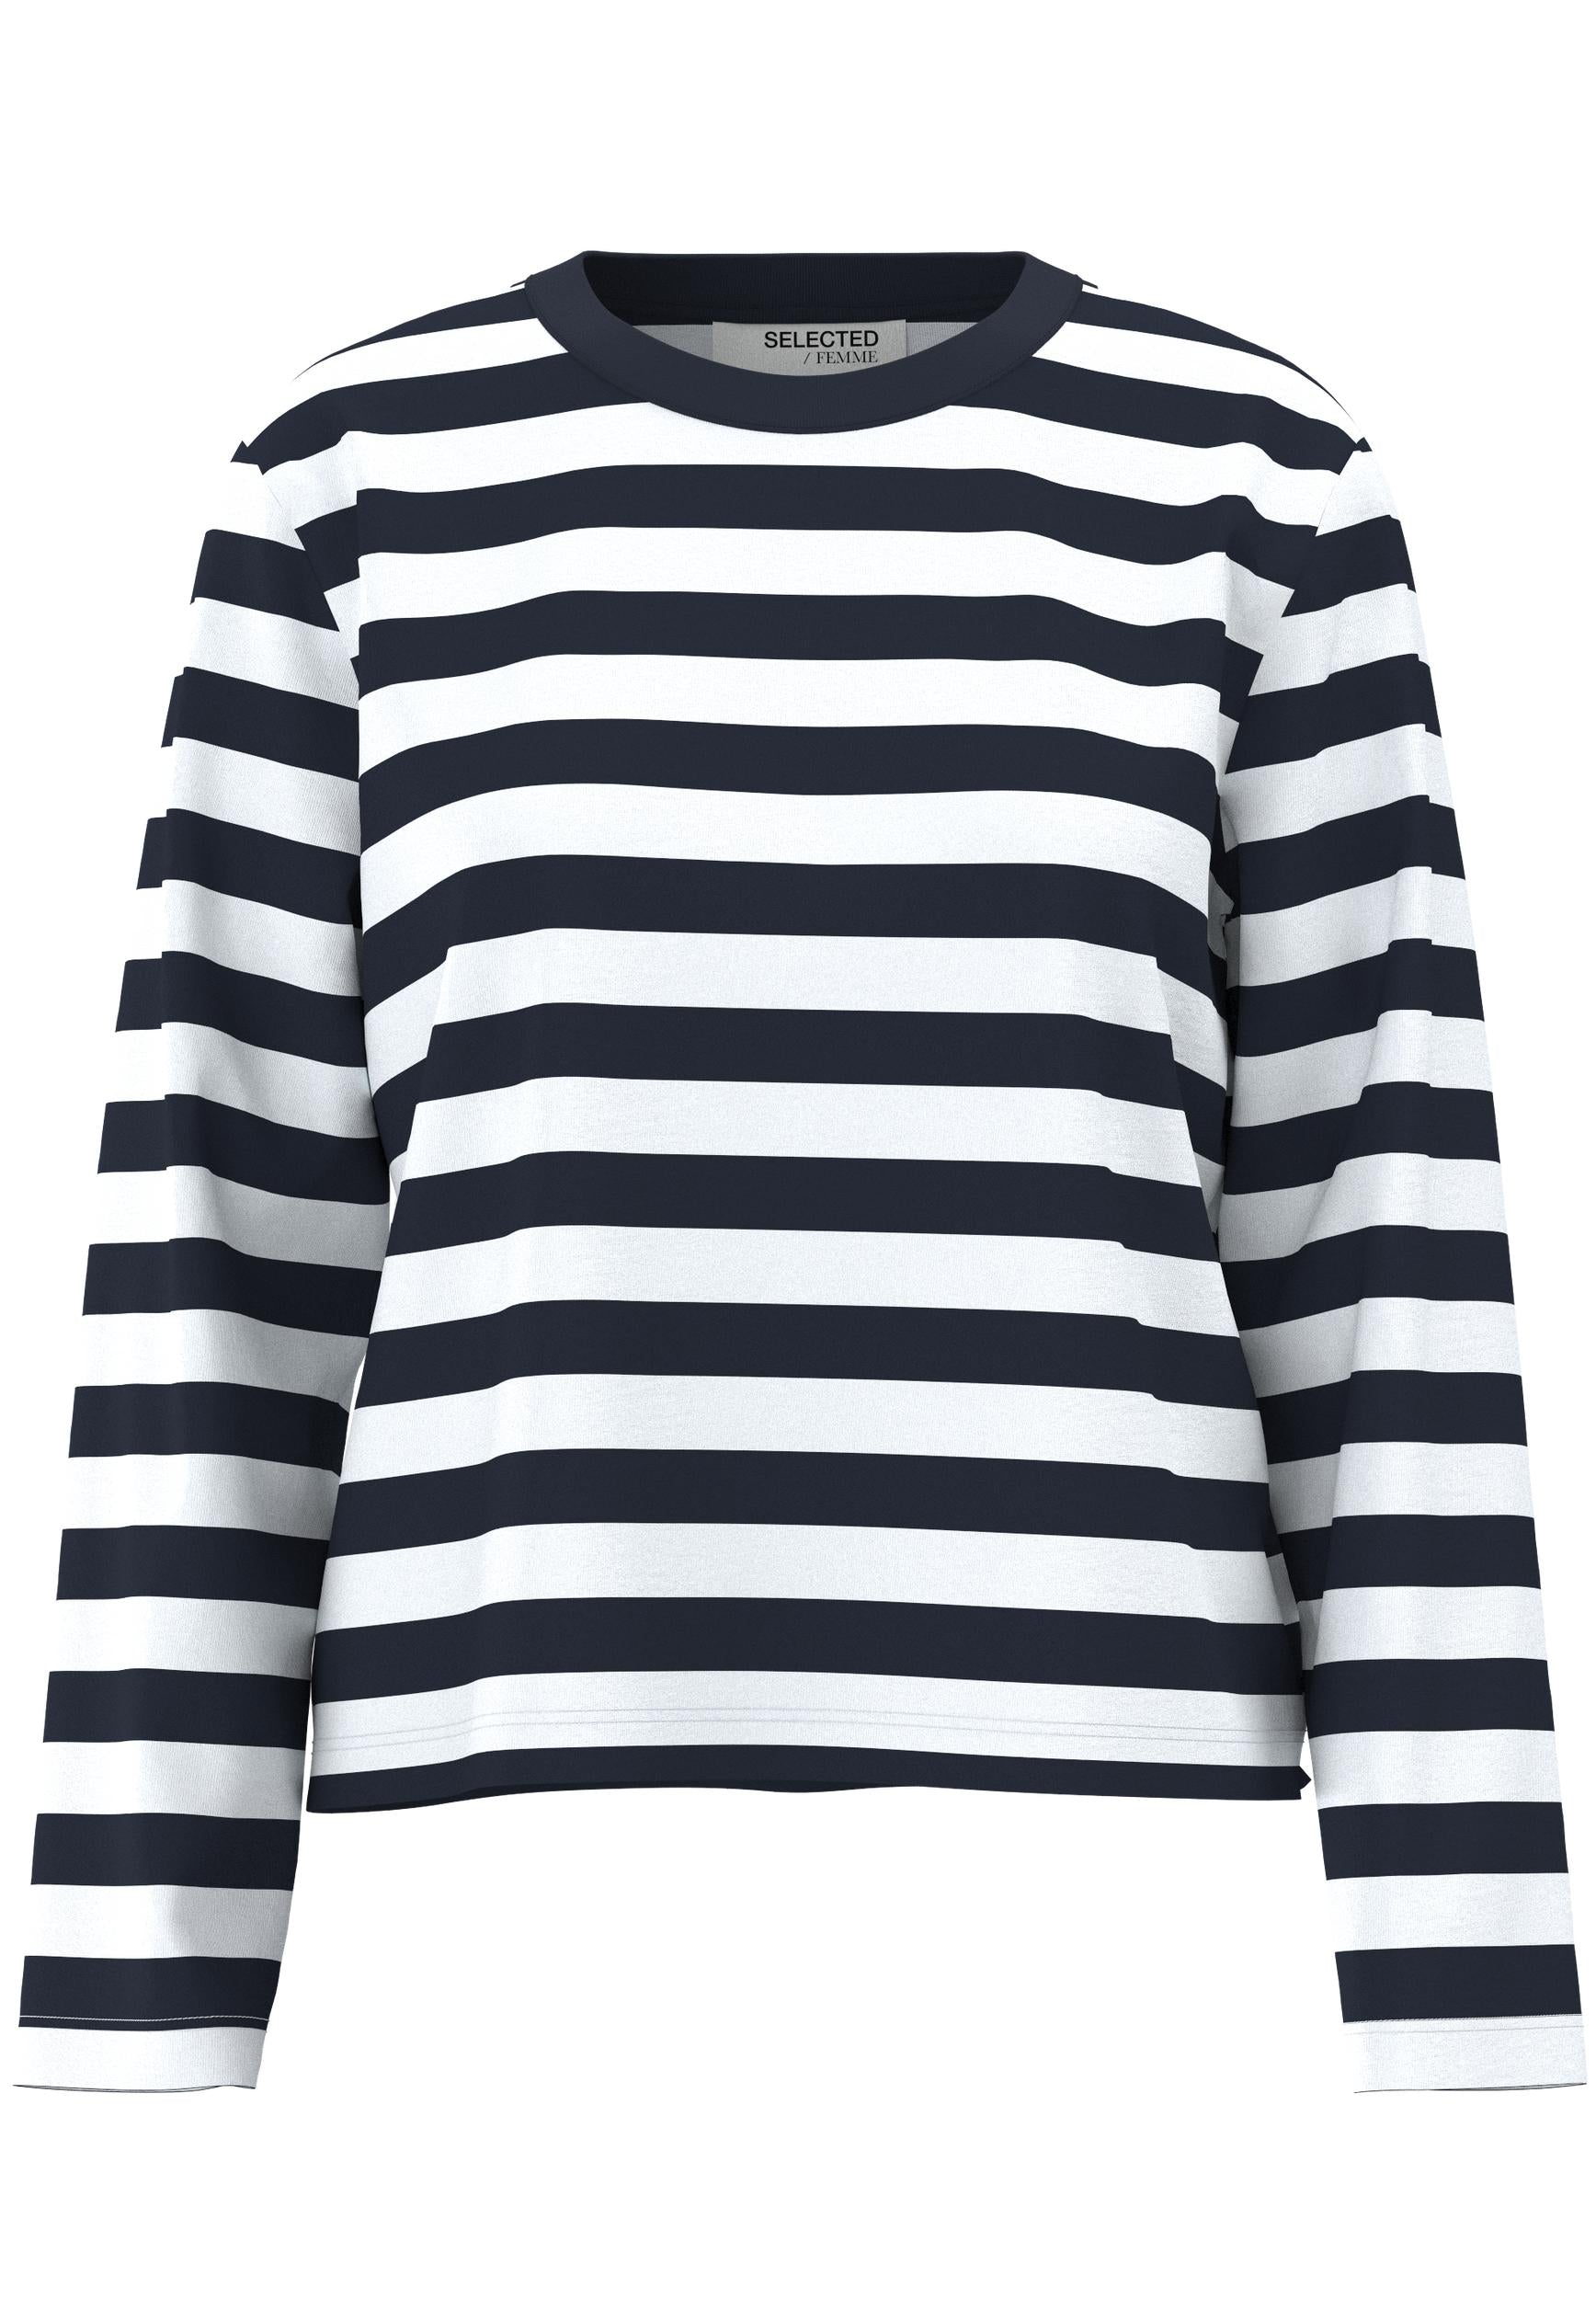 Selected Femme "Essential" Striped Boxy Tee schwarz